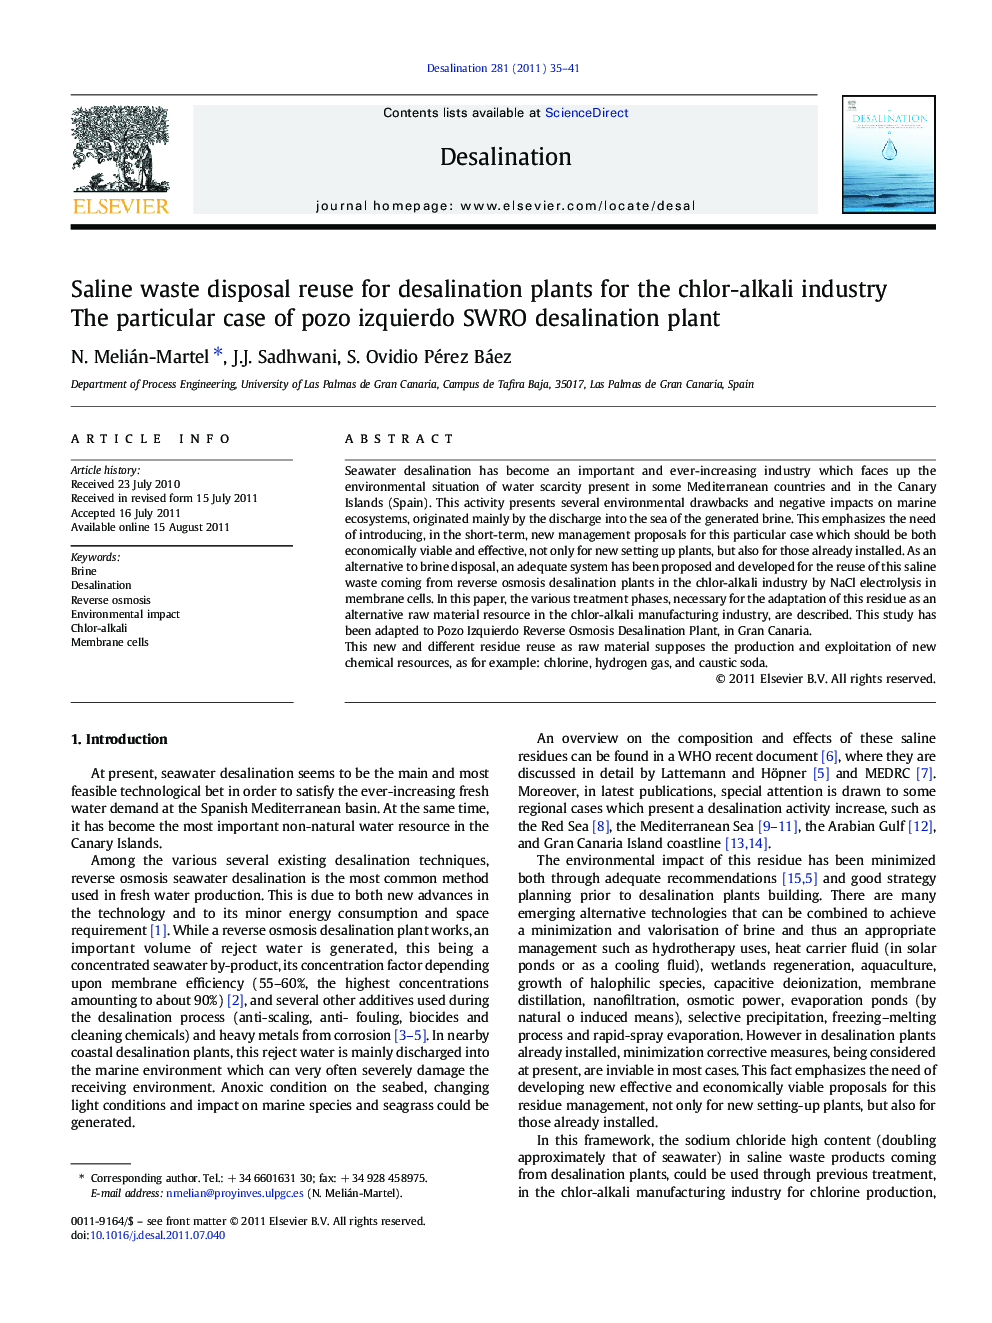 Saline waste disposal reuse for desalination plants for the chlor-alkali industry: The particular case of pozo izquierdo SWRO desalination plant